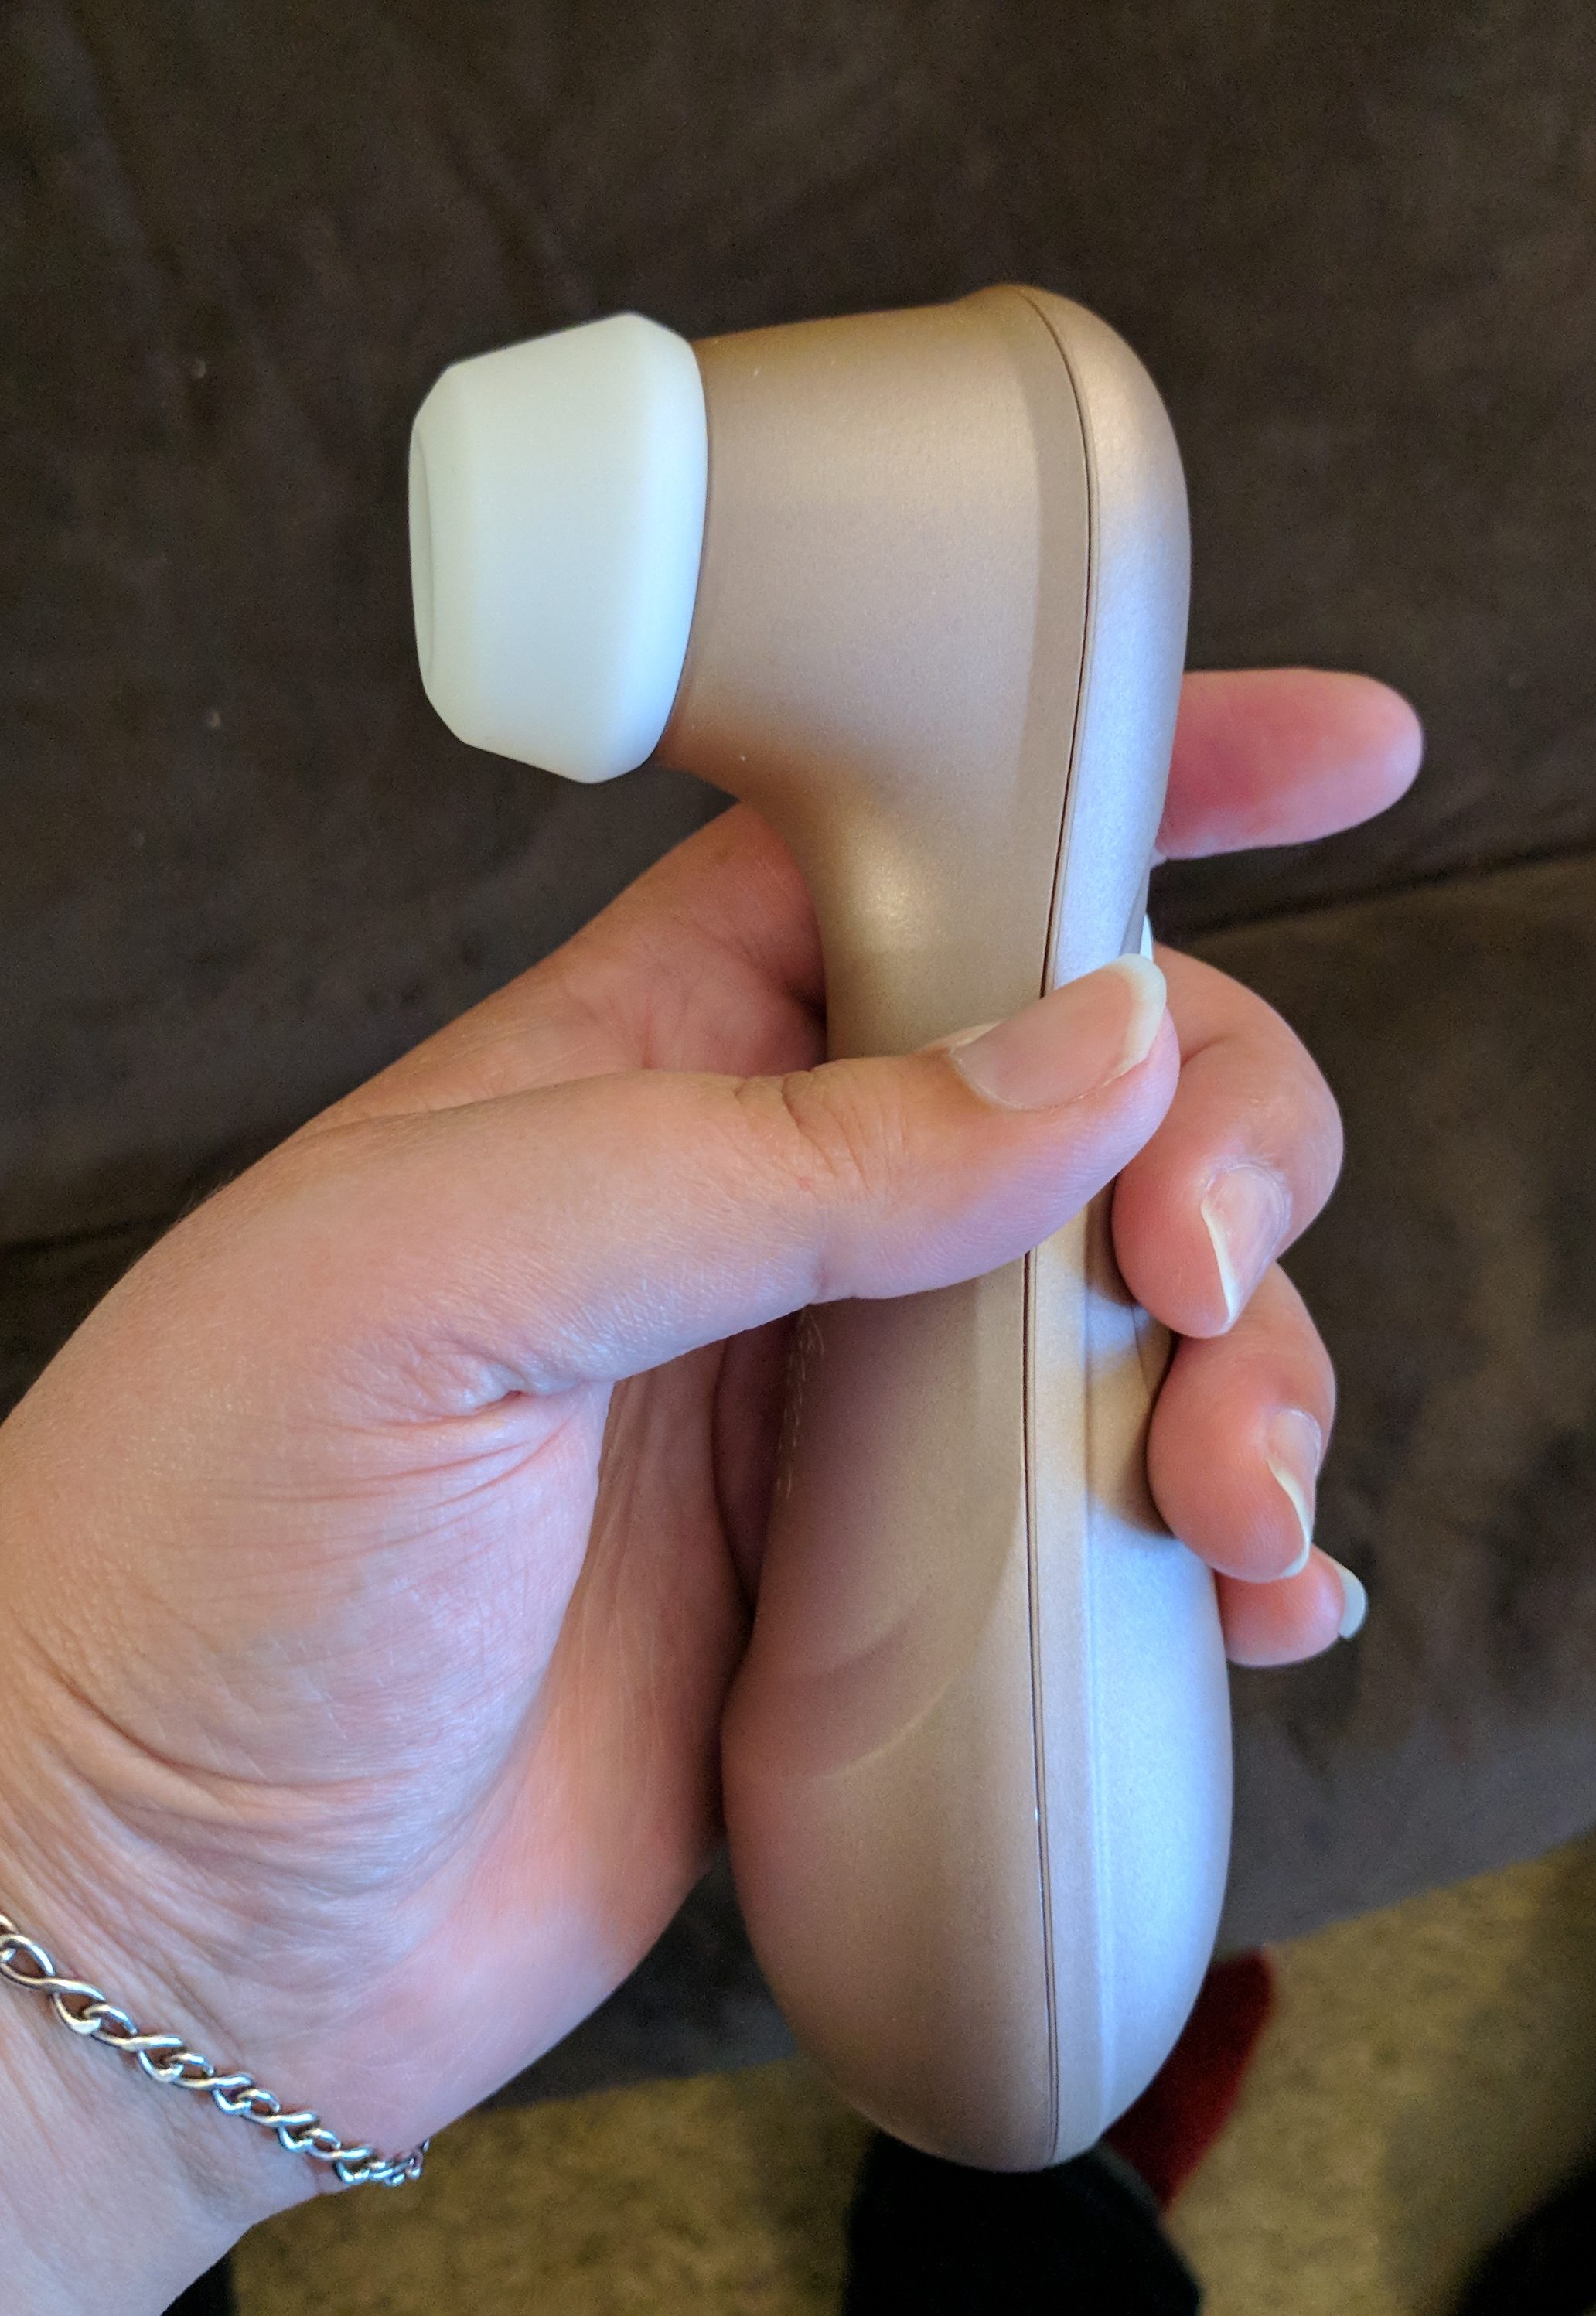 Satisfyer Pro 2 in hand from the side